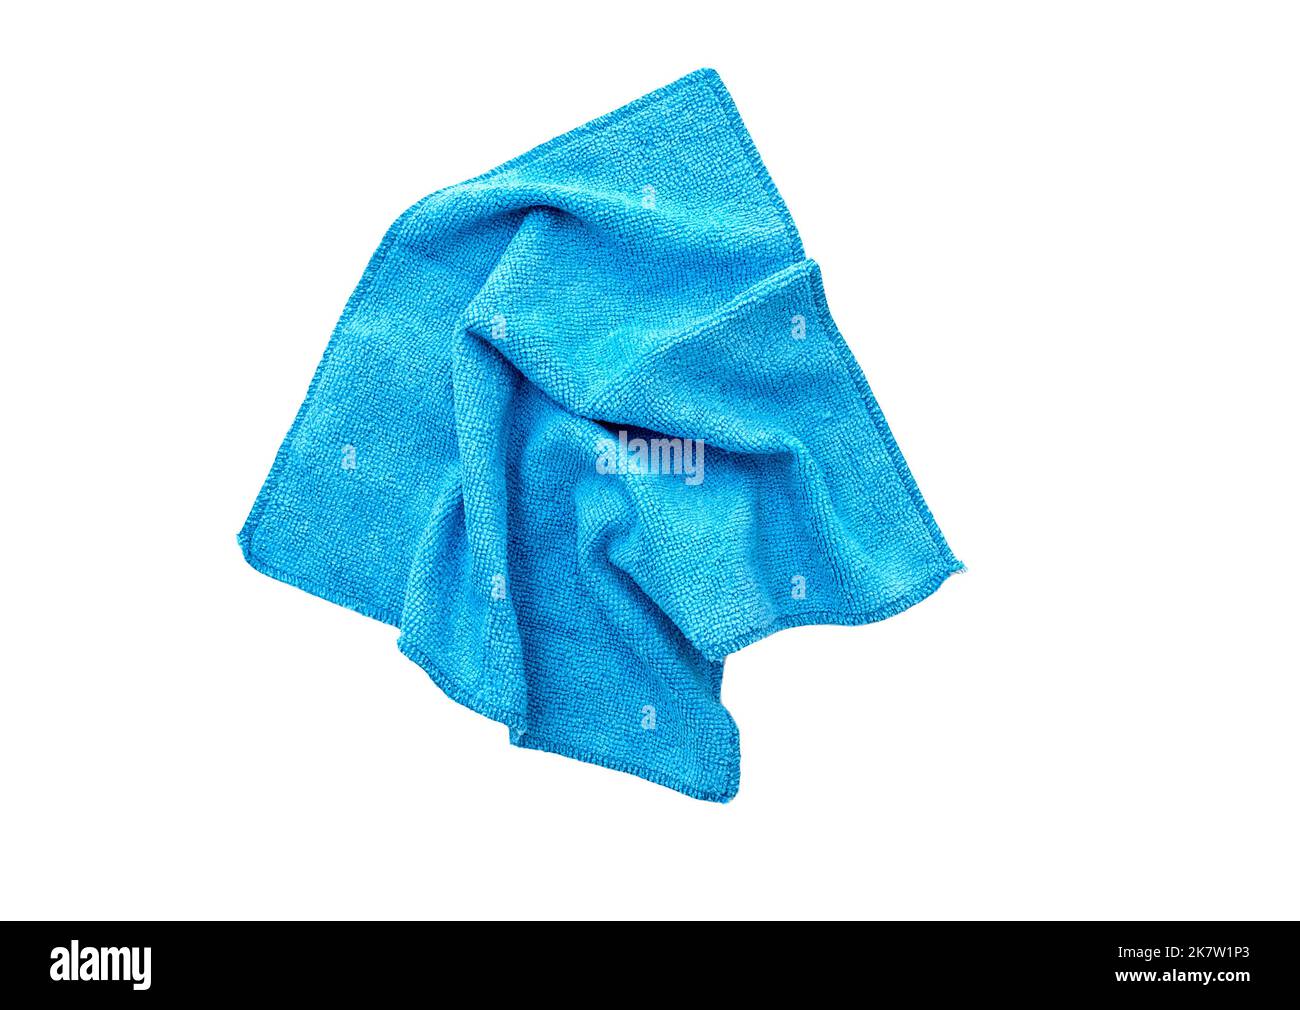 Three New Red Checkered Kitchen Picnic Towels Folded Versus Old Dirty Torn  Blue Cloth Towels Cleaning And Regularly Changing Kitchen Rags And Cloth  Stock Photo - Download Image Now - iStock